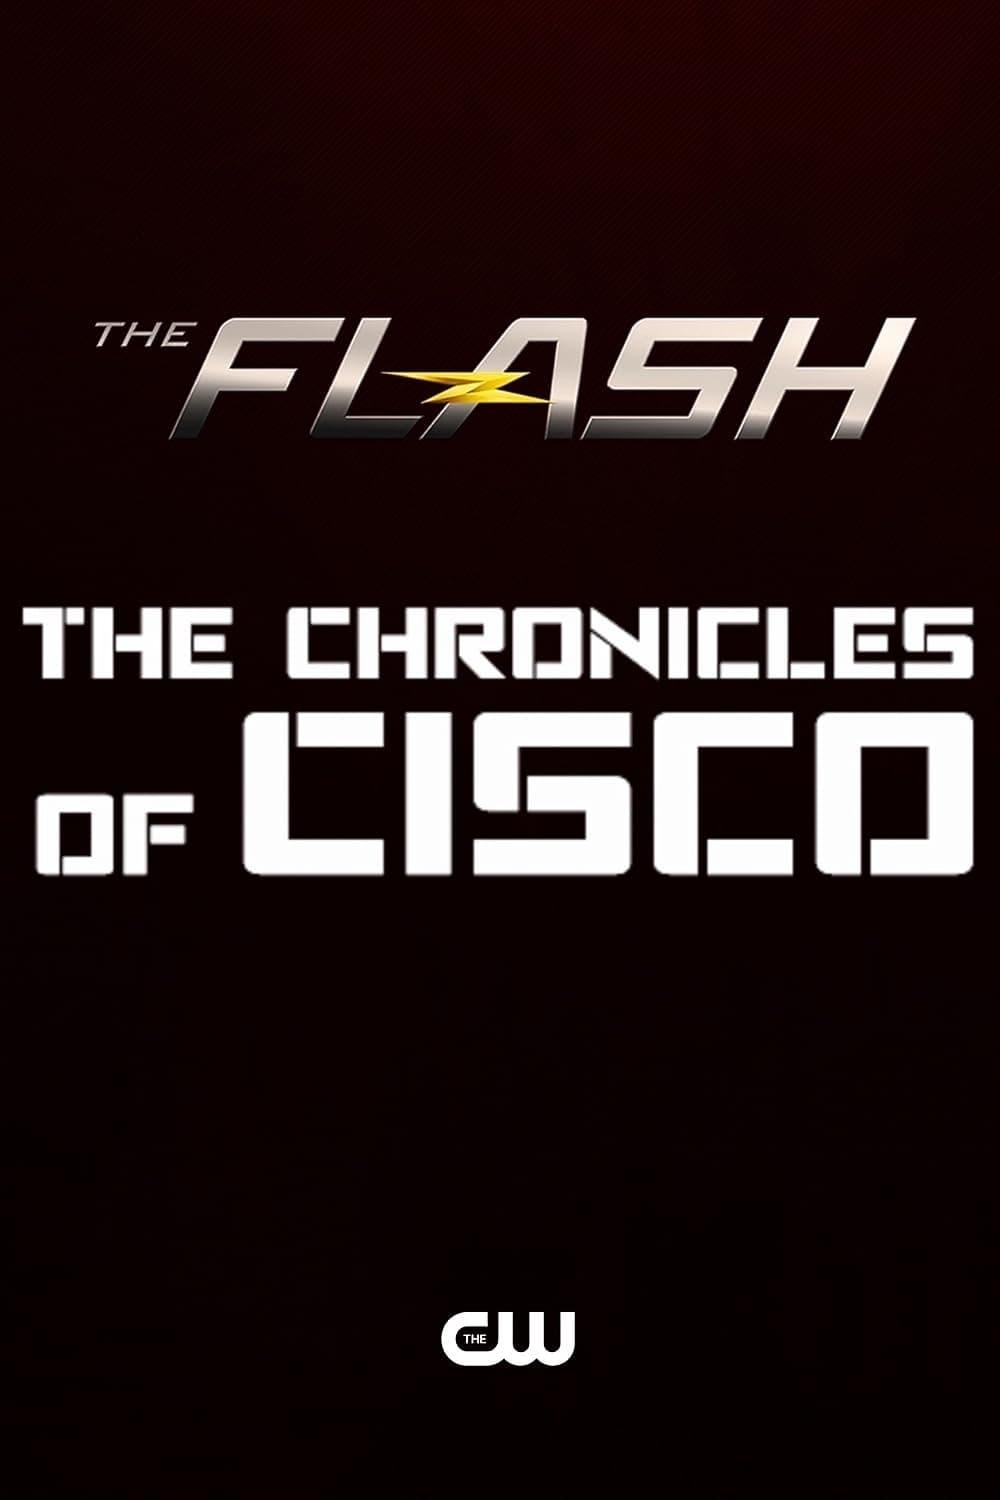 The Flash: Chronicles of Cisco poster